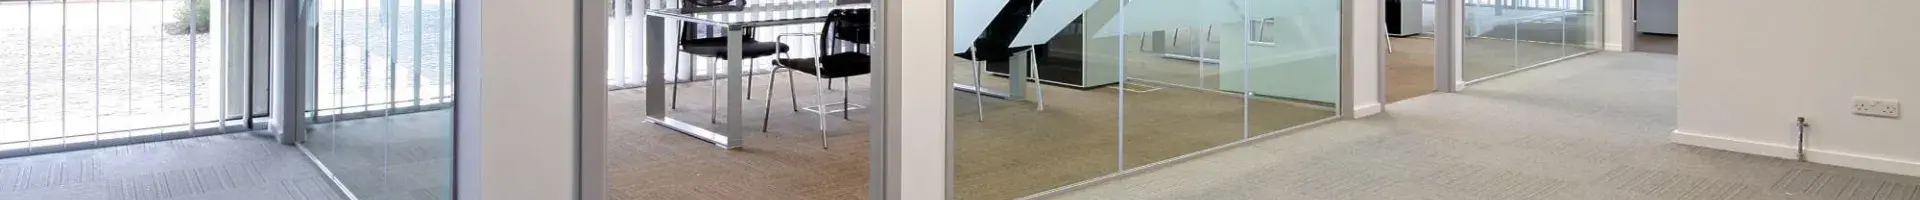  Commercial Carpet Cleaning Services 